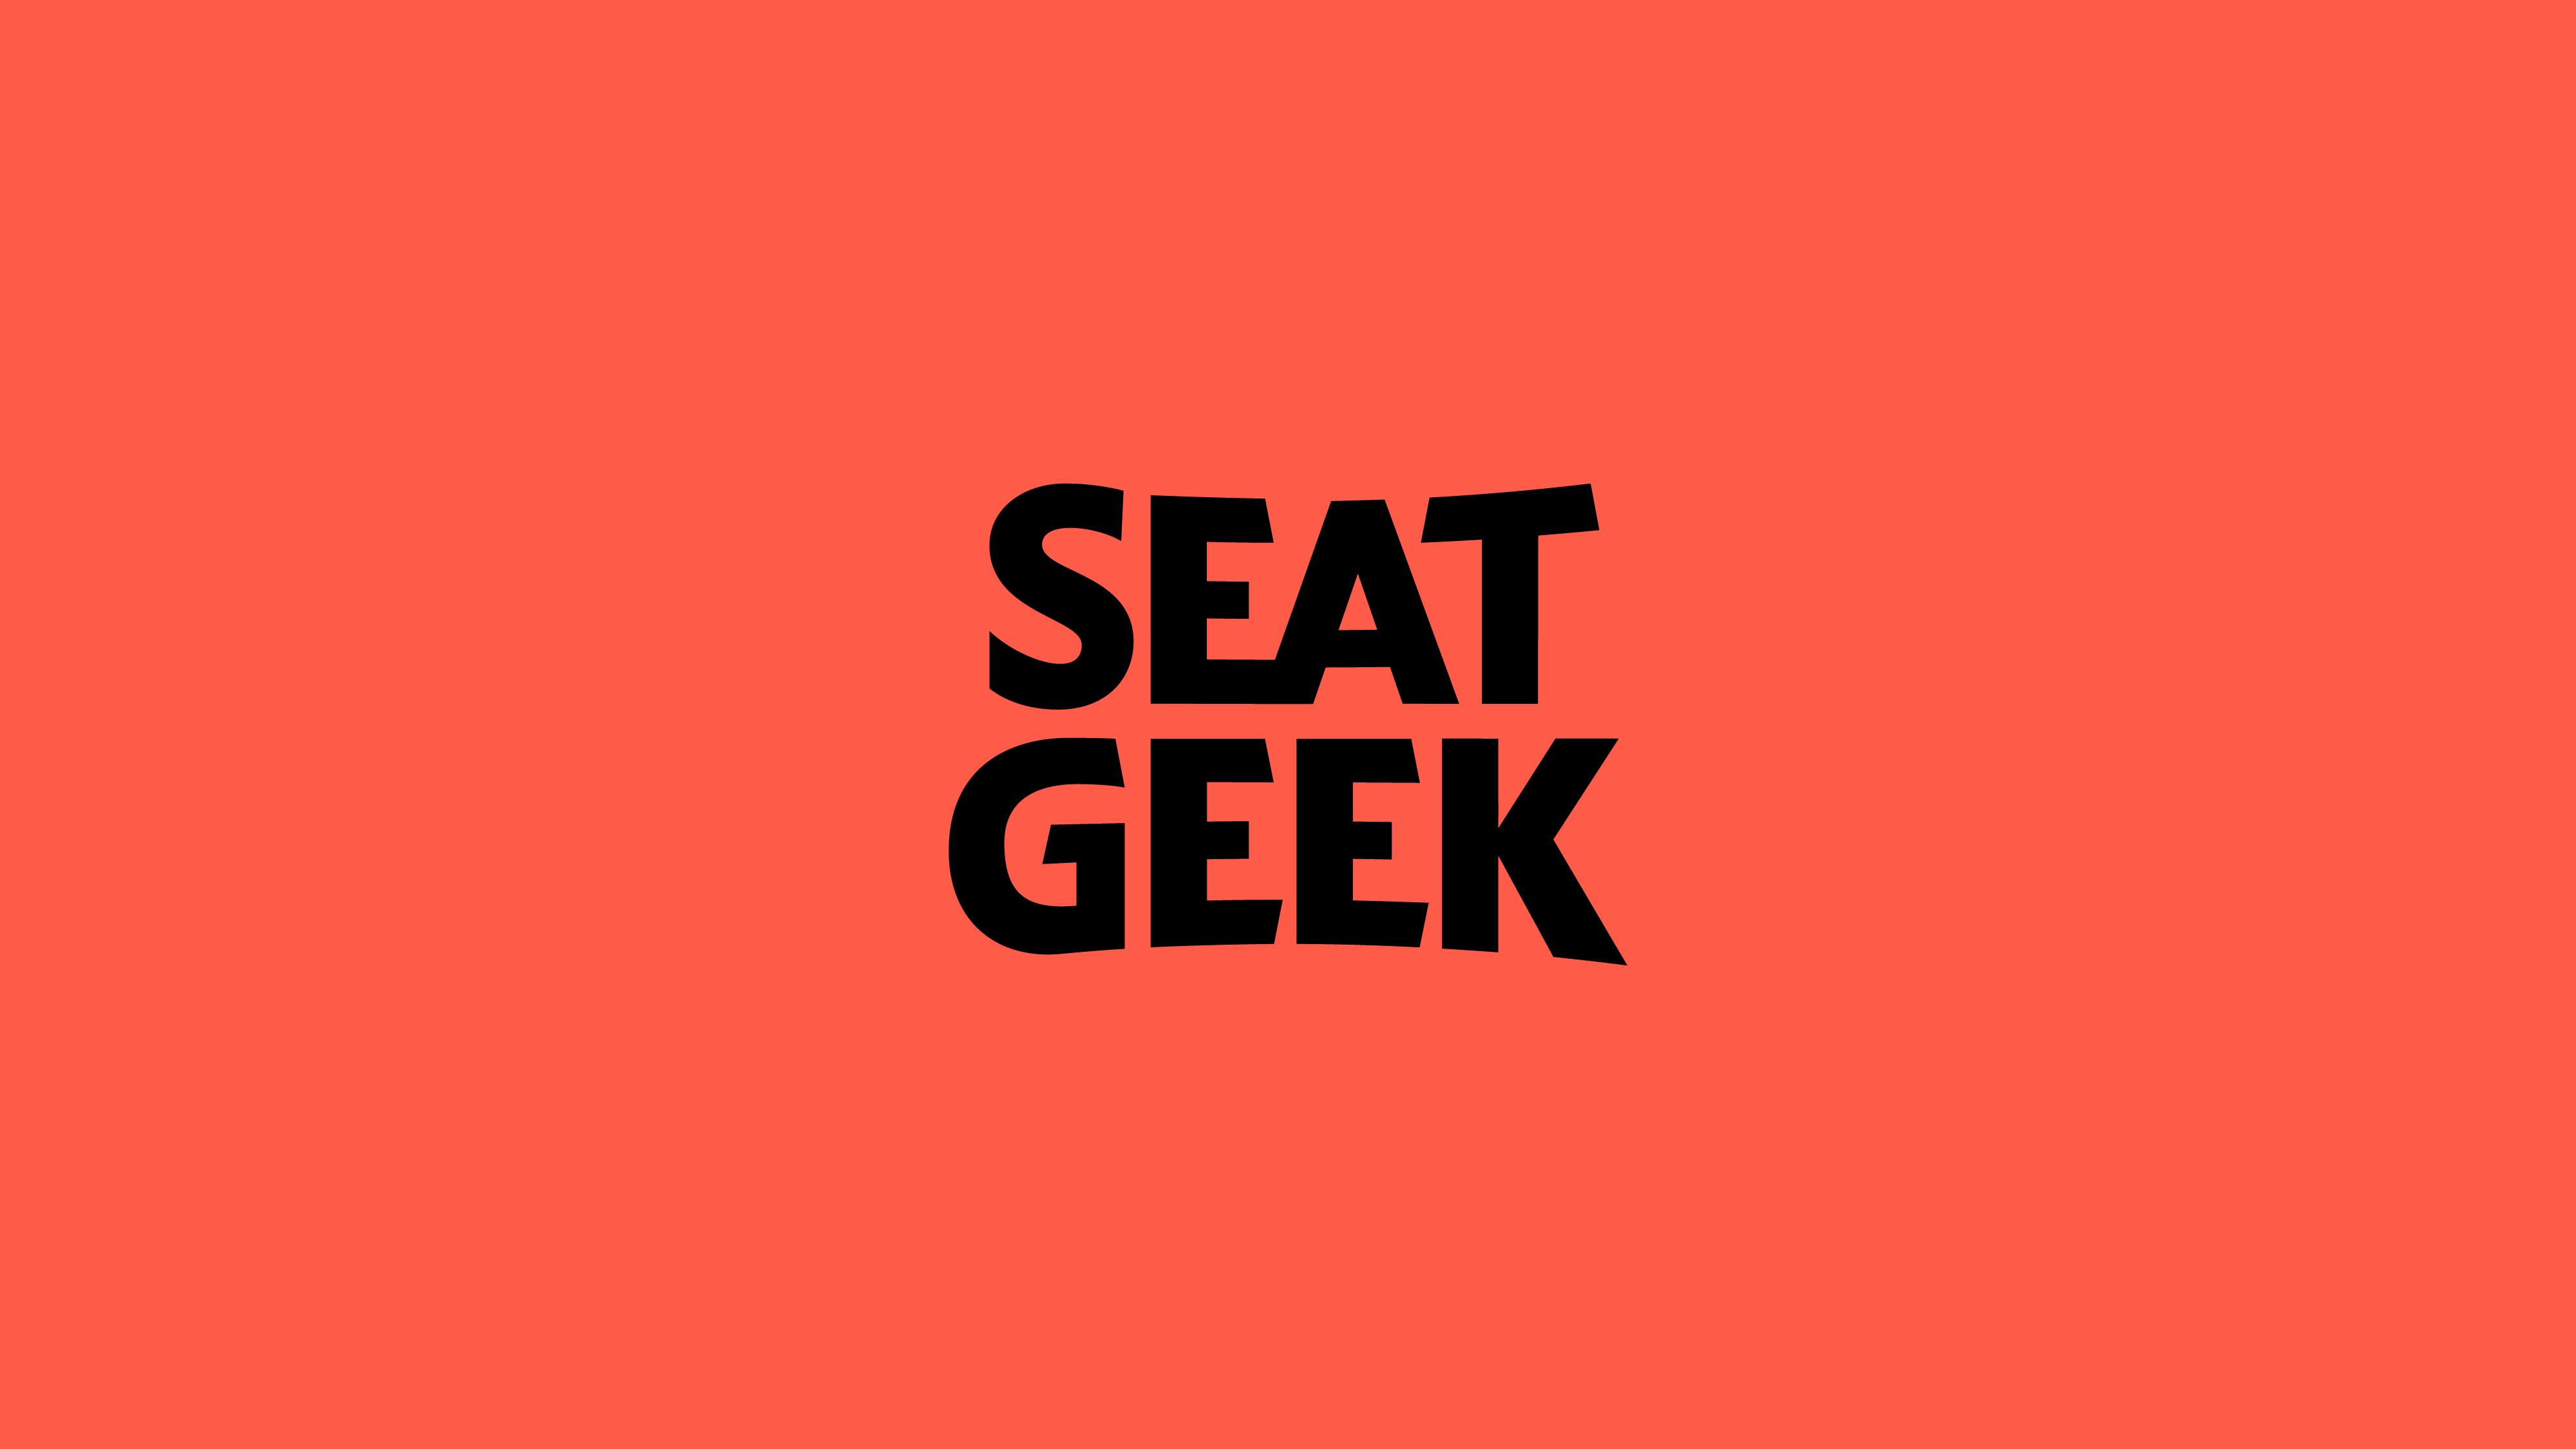 SeatGeek (Basketball) - 1st Time User Discount with Promo Code: BOHNING thumbnail